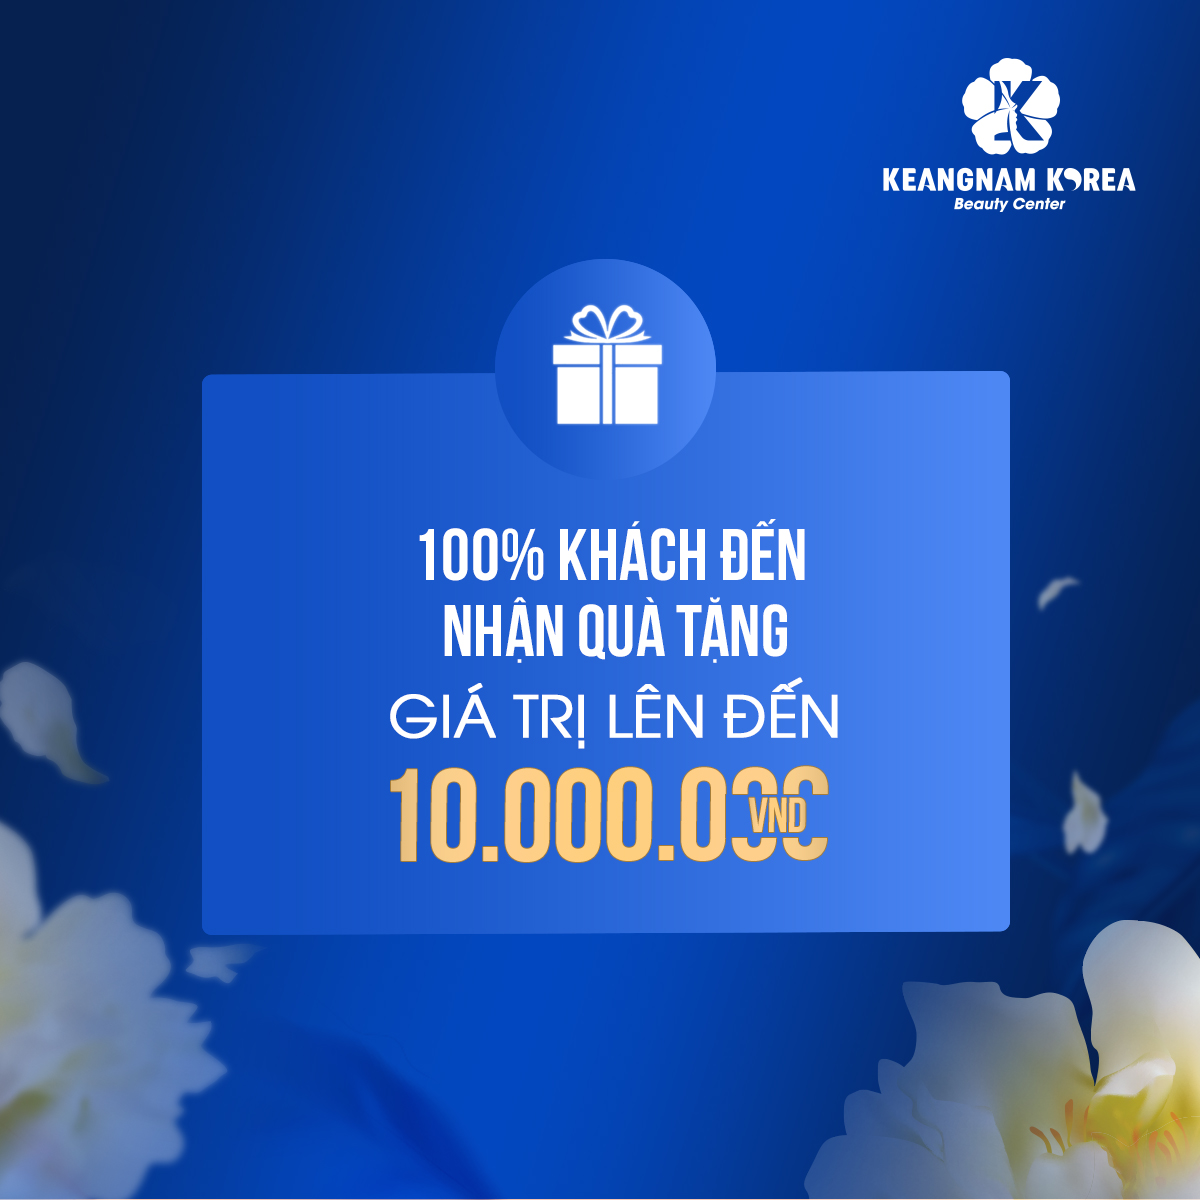 March promotion - 100% of guests receive gifts worth up to 10 million VND